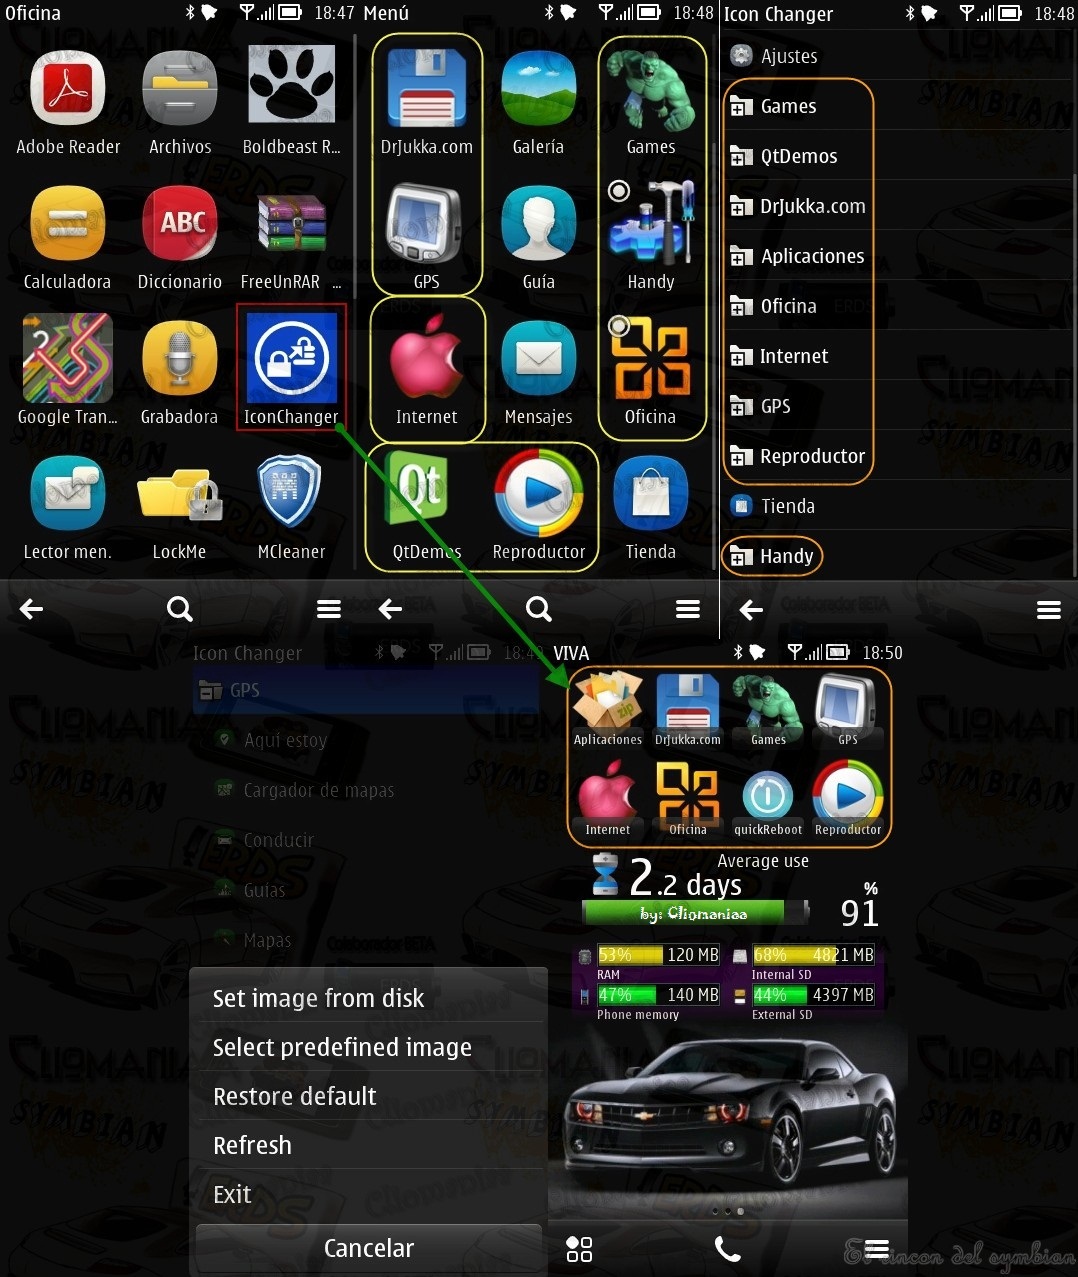 Mobile Apps Icons Free Download